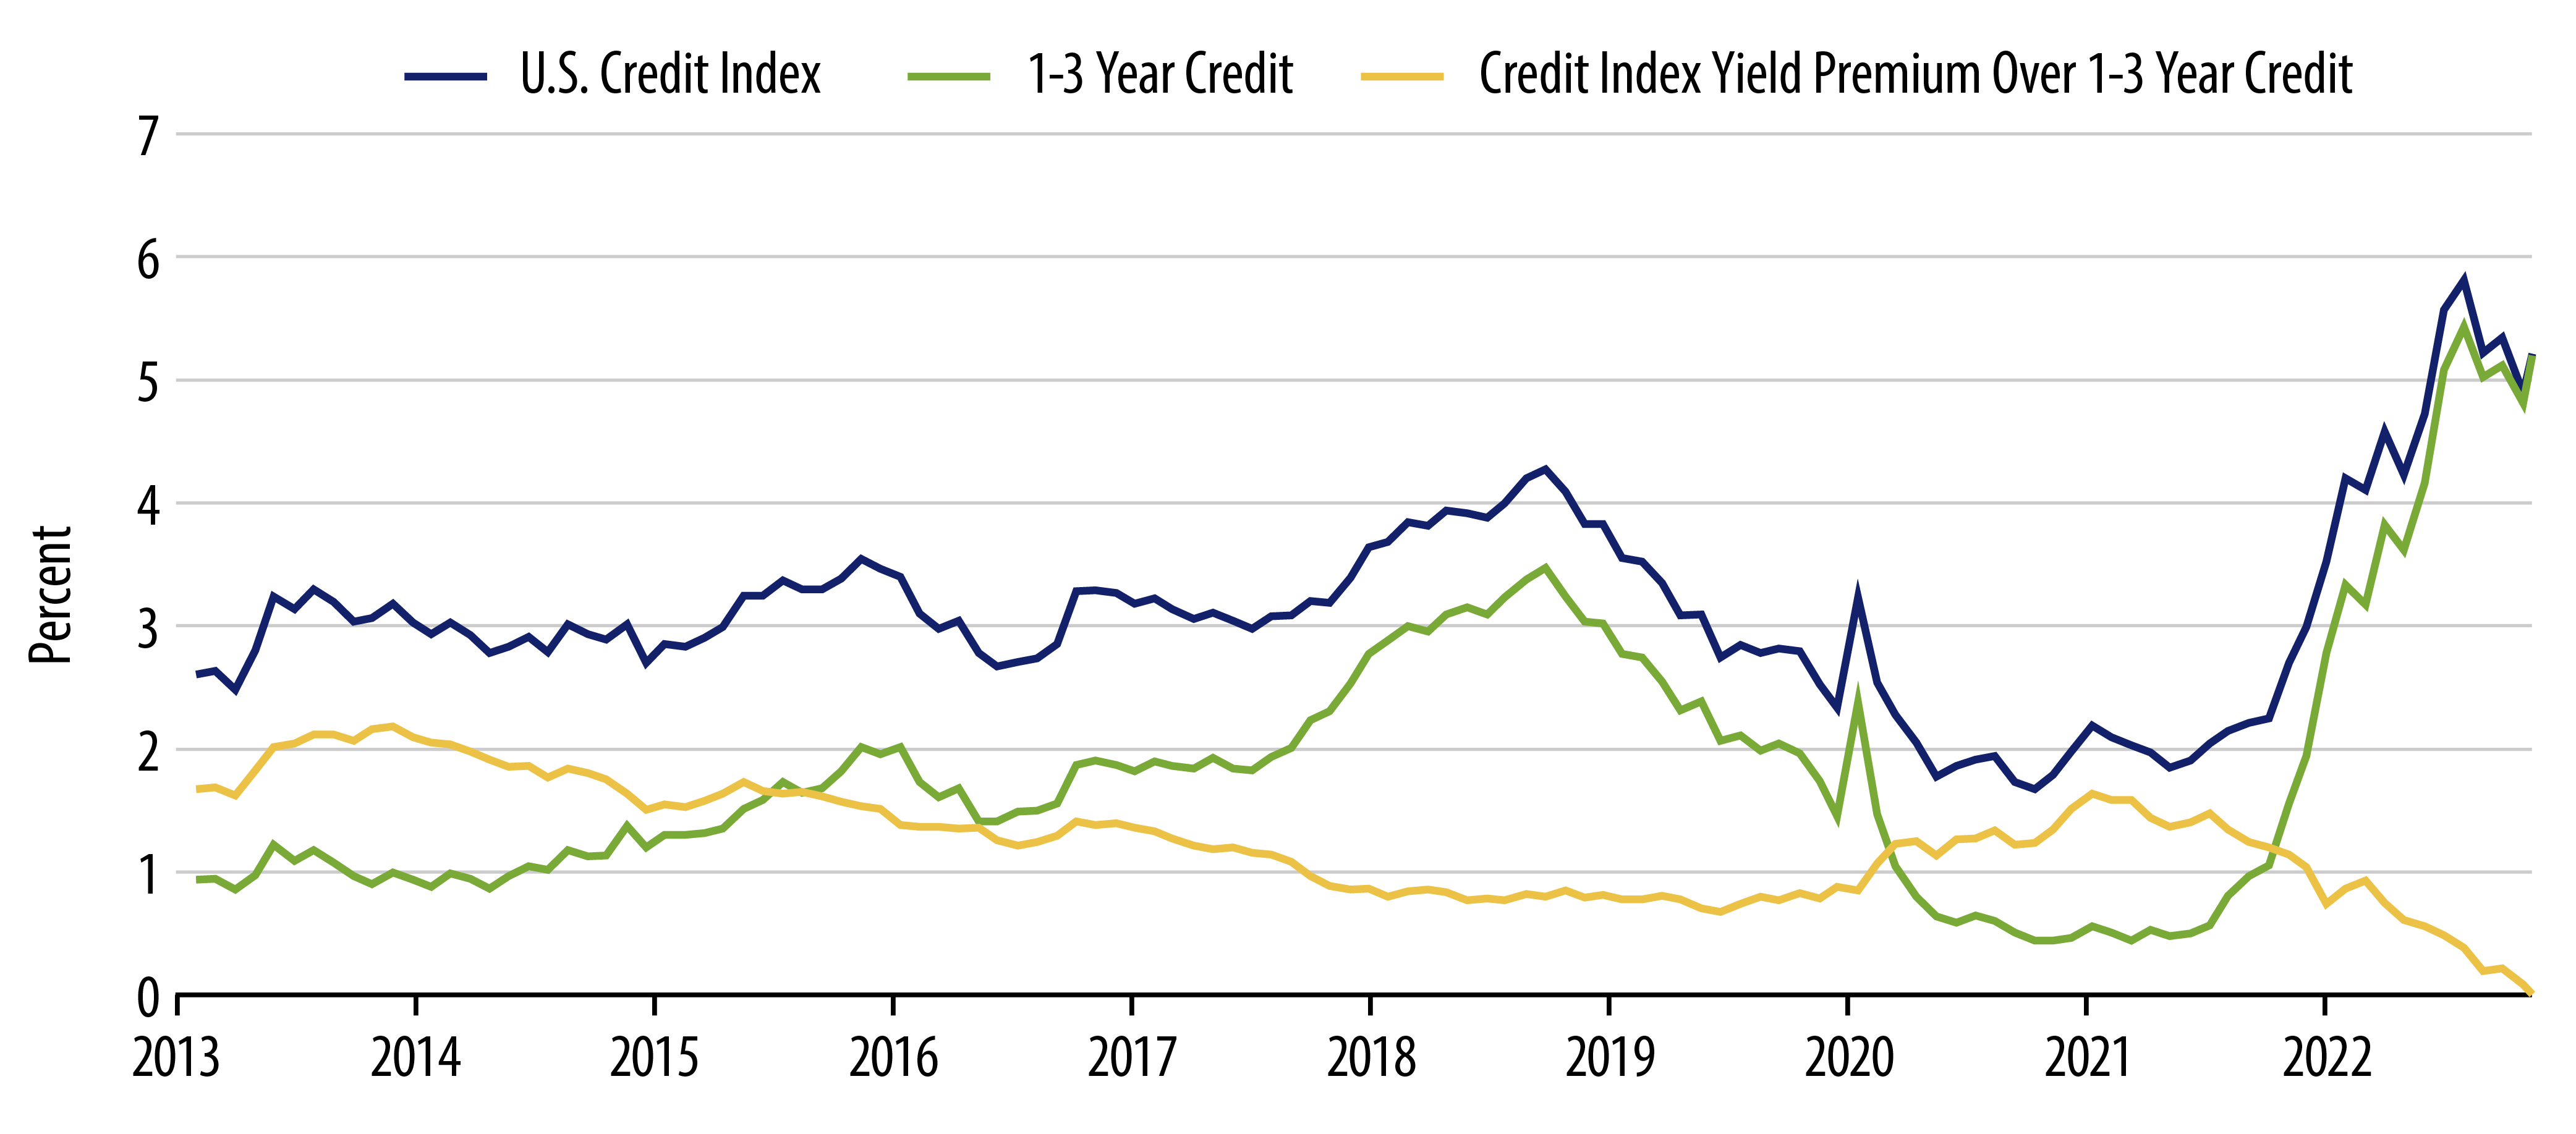 Investment-Grade Credit Yields